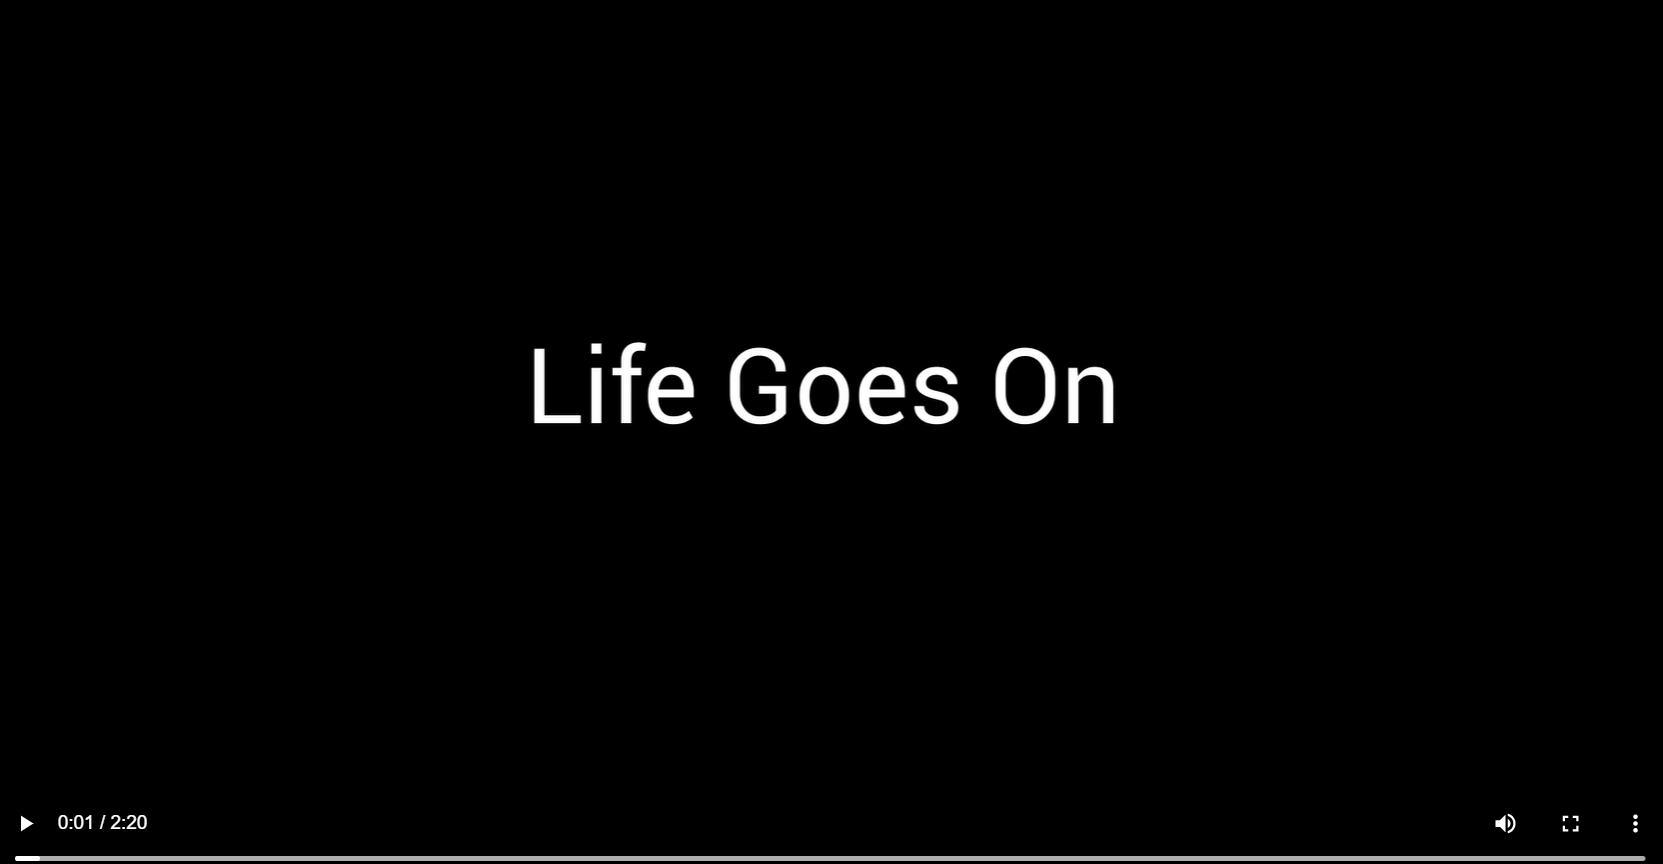 The words "life goes on" appear in white against a solid black background. 